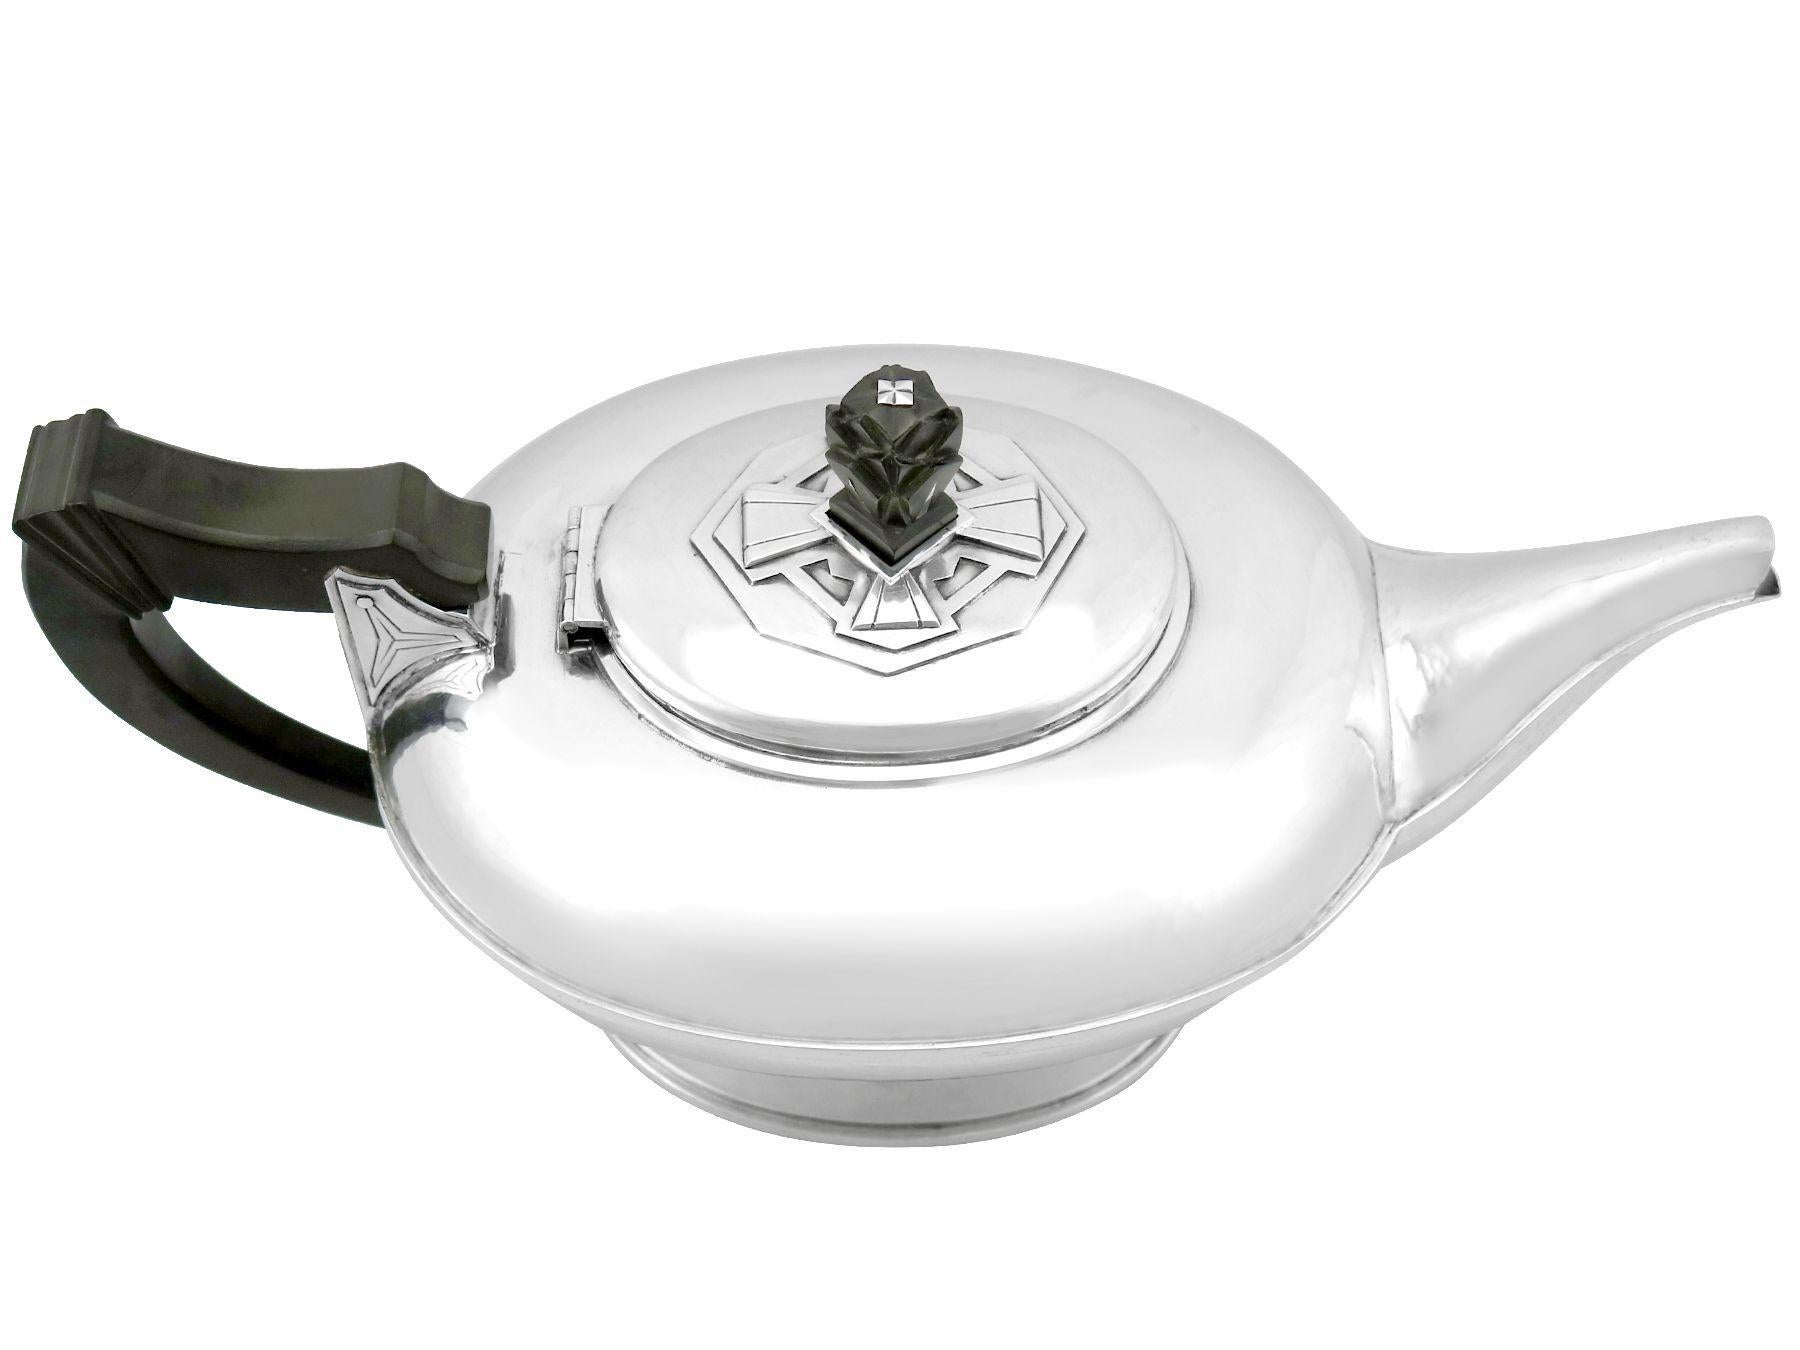 An exceptional, fine and impressive antique George V English sterling silver teapot in the Arts and crafts style; part of our diverse teaware collection.

This exceptional antique George V sterling silver teapot has a compressed oval rounded form